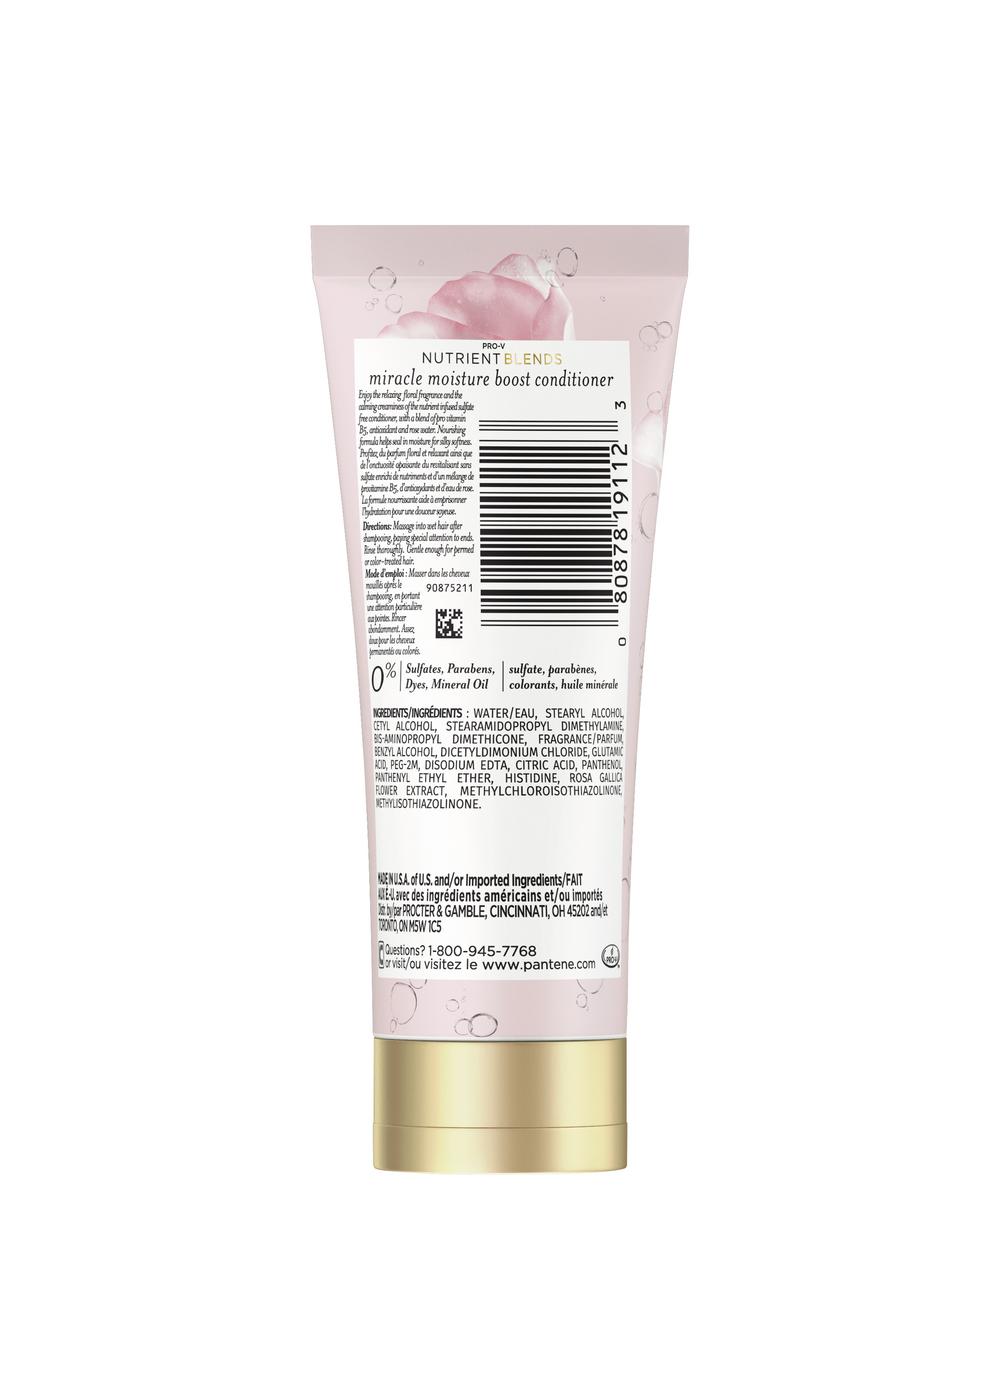 Pantene Pro-V Nutrient Blends Miracle Moisture Boost Conditioner; image 6 of 7